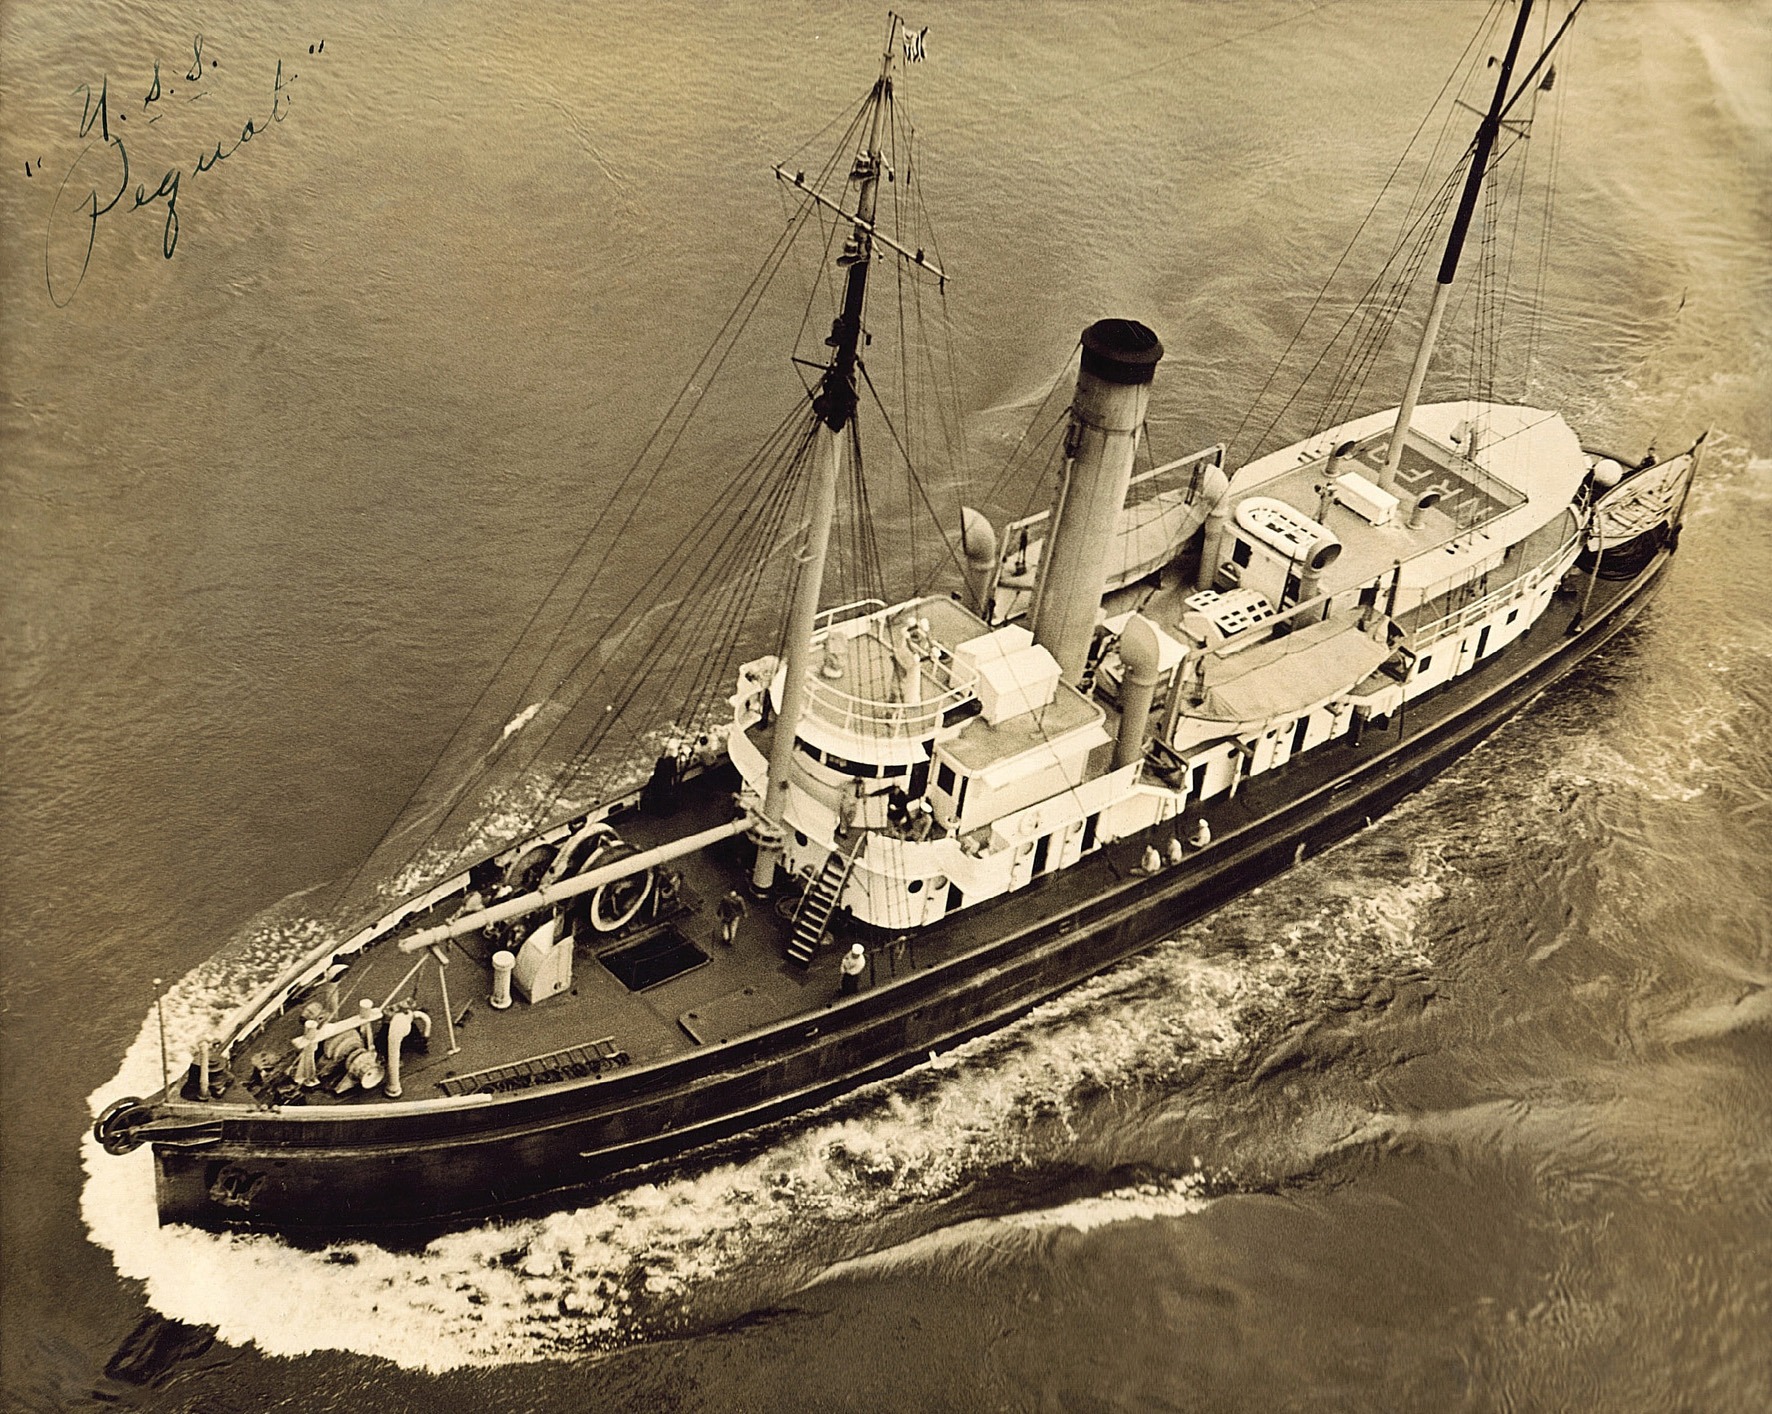 5.	Image of the Pequot II, former U.S. Army minelayer turned Coast Guard cable layer. (indicatorloops.com)